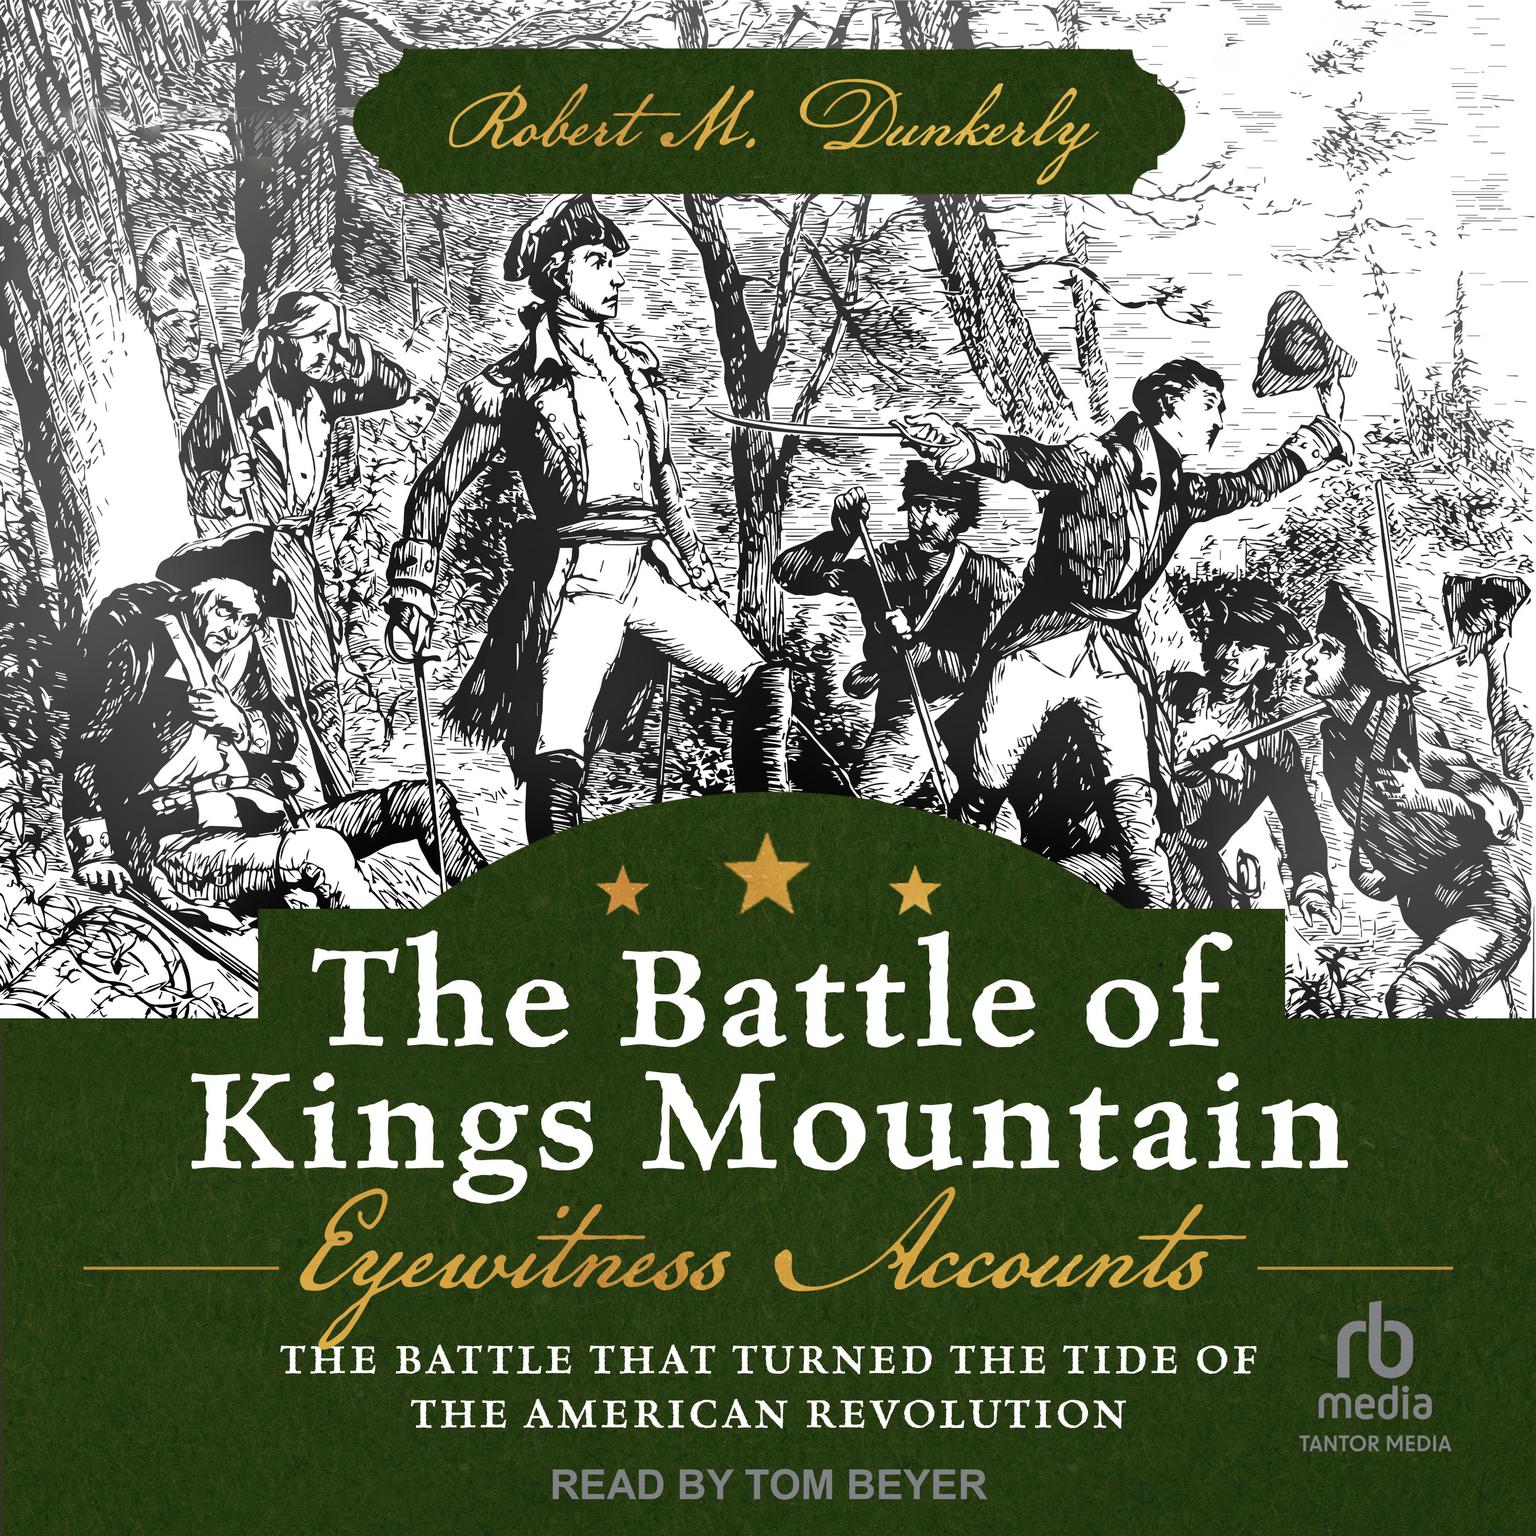 The Battle of Kings Mountain: Eyewitness Accounts: The Battle That Turned The Tide of the American Revolution Audiobook, by Robert M. Dunkerly